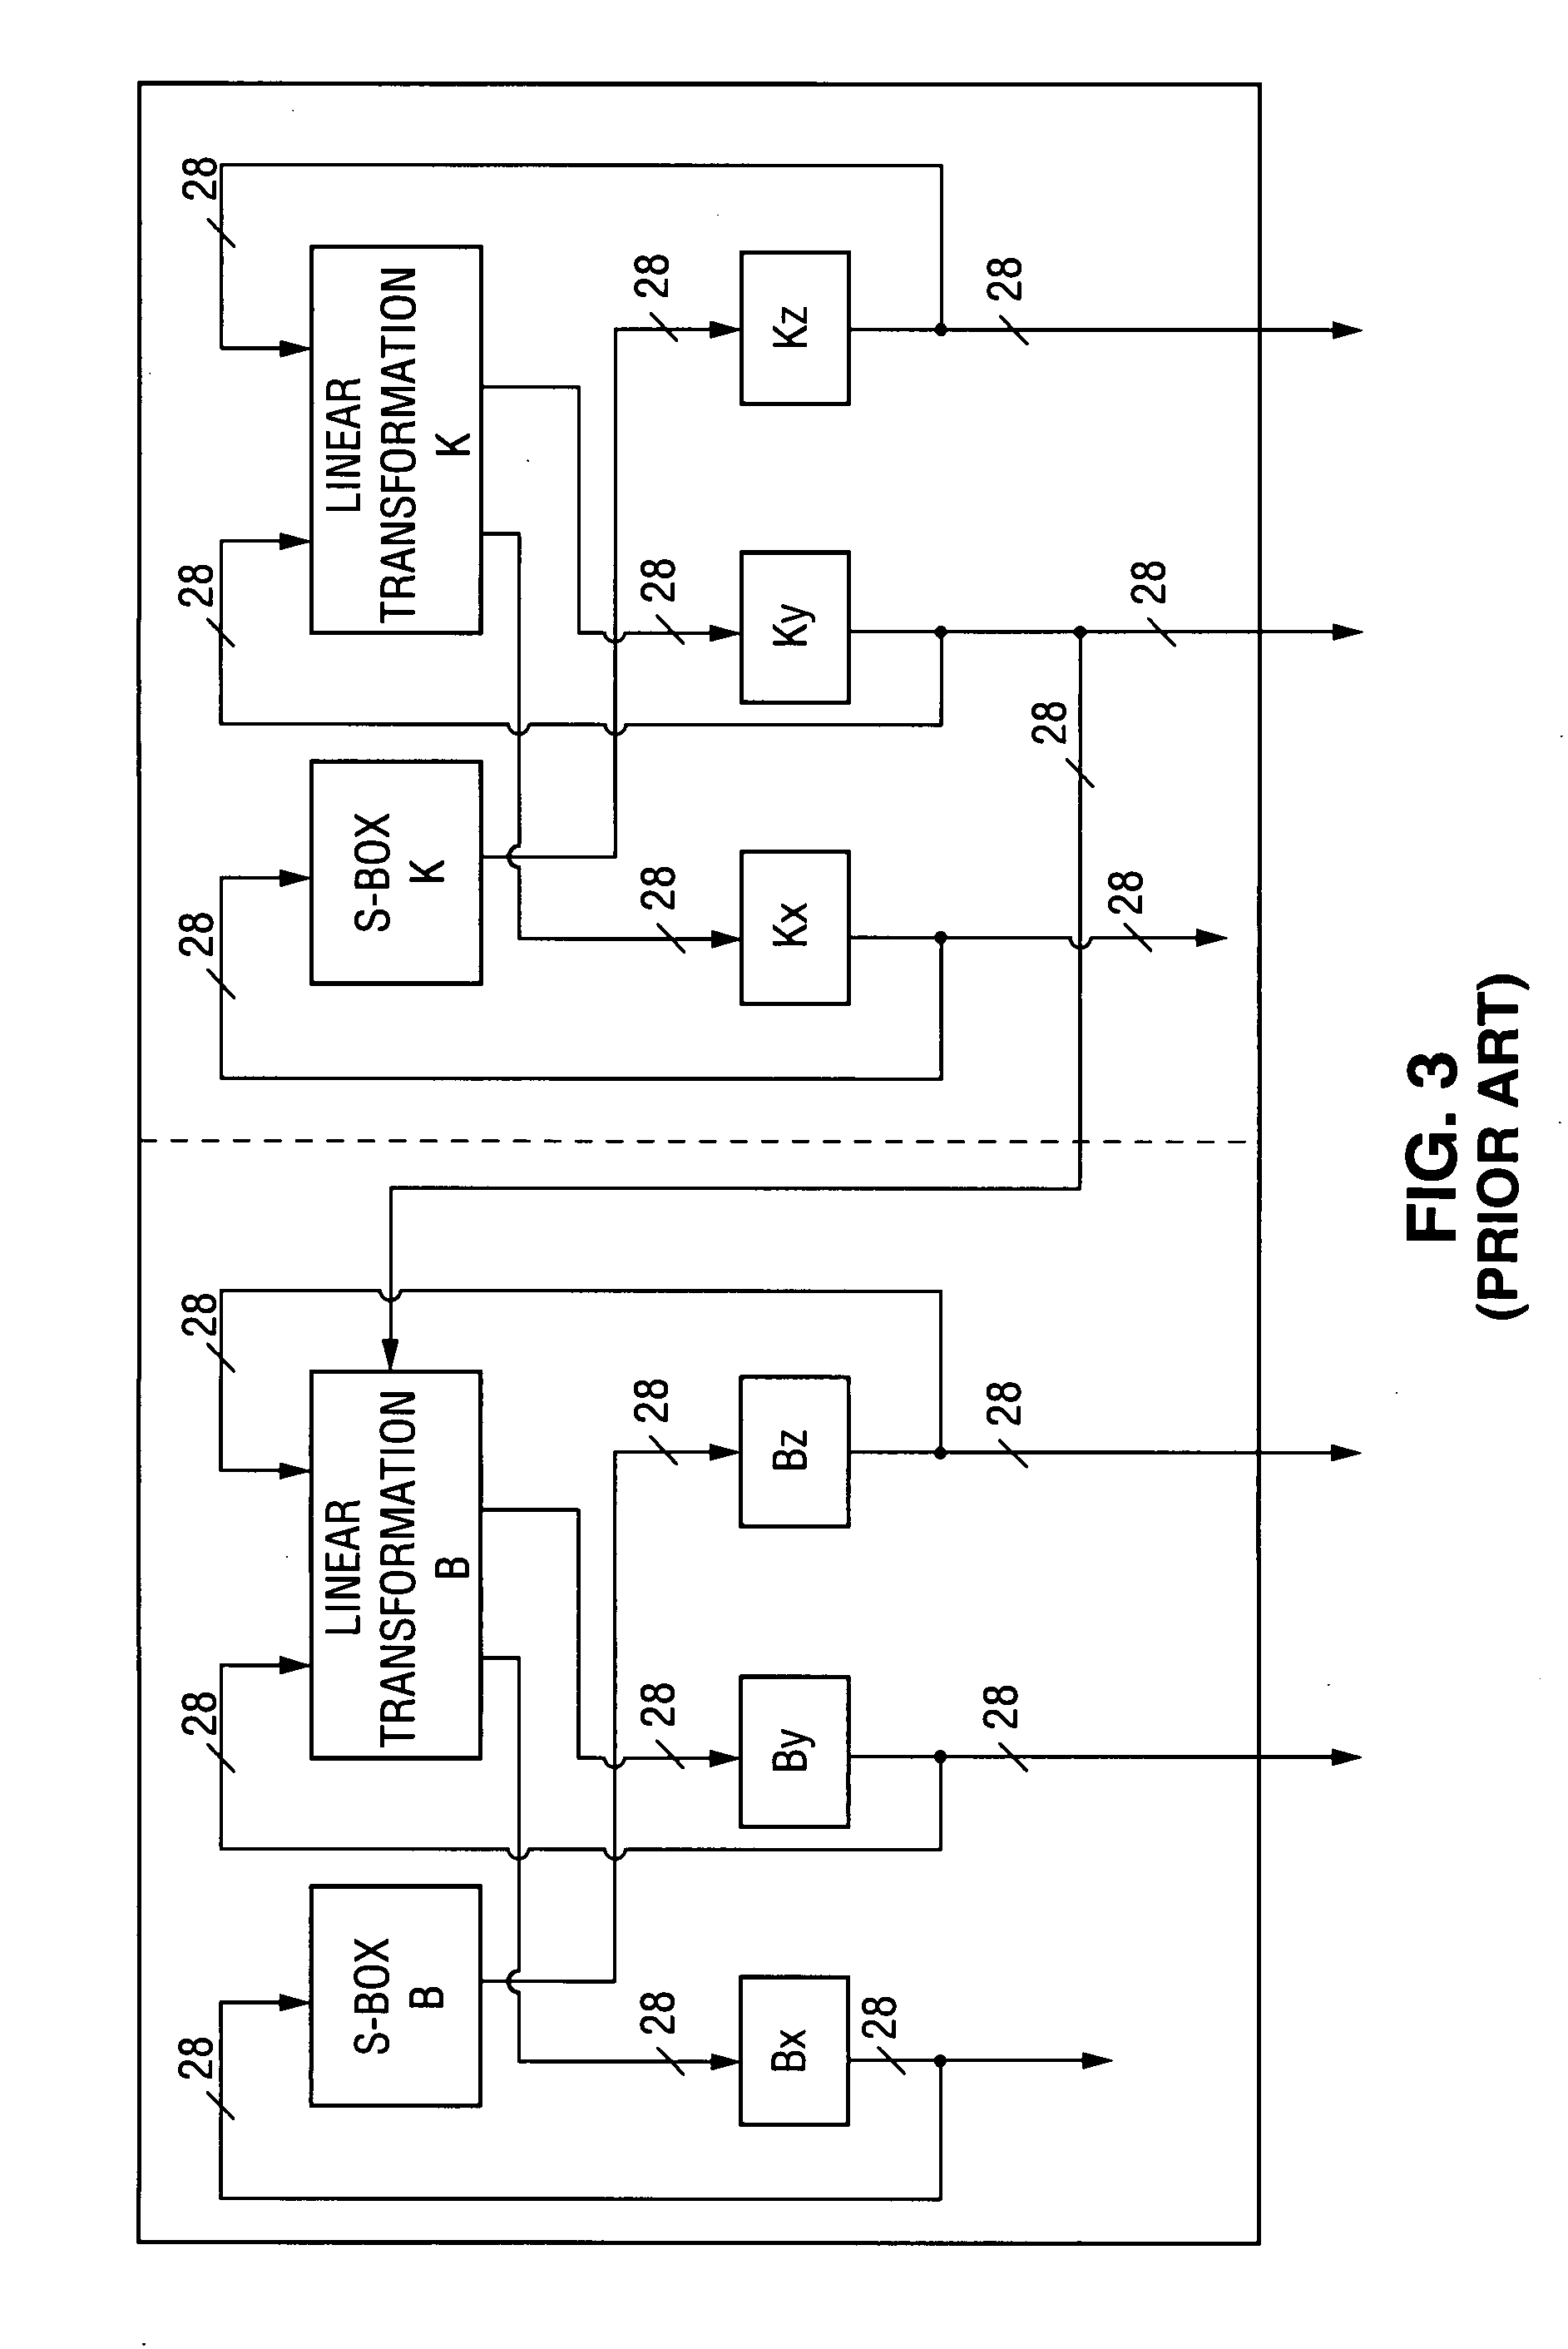 Method and apparatus for content protection in a personal digital network environment